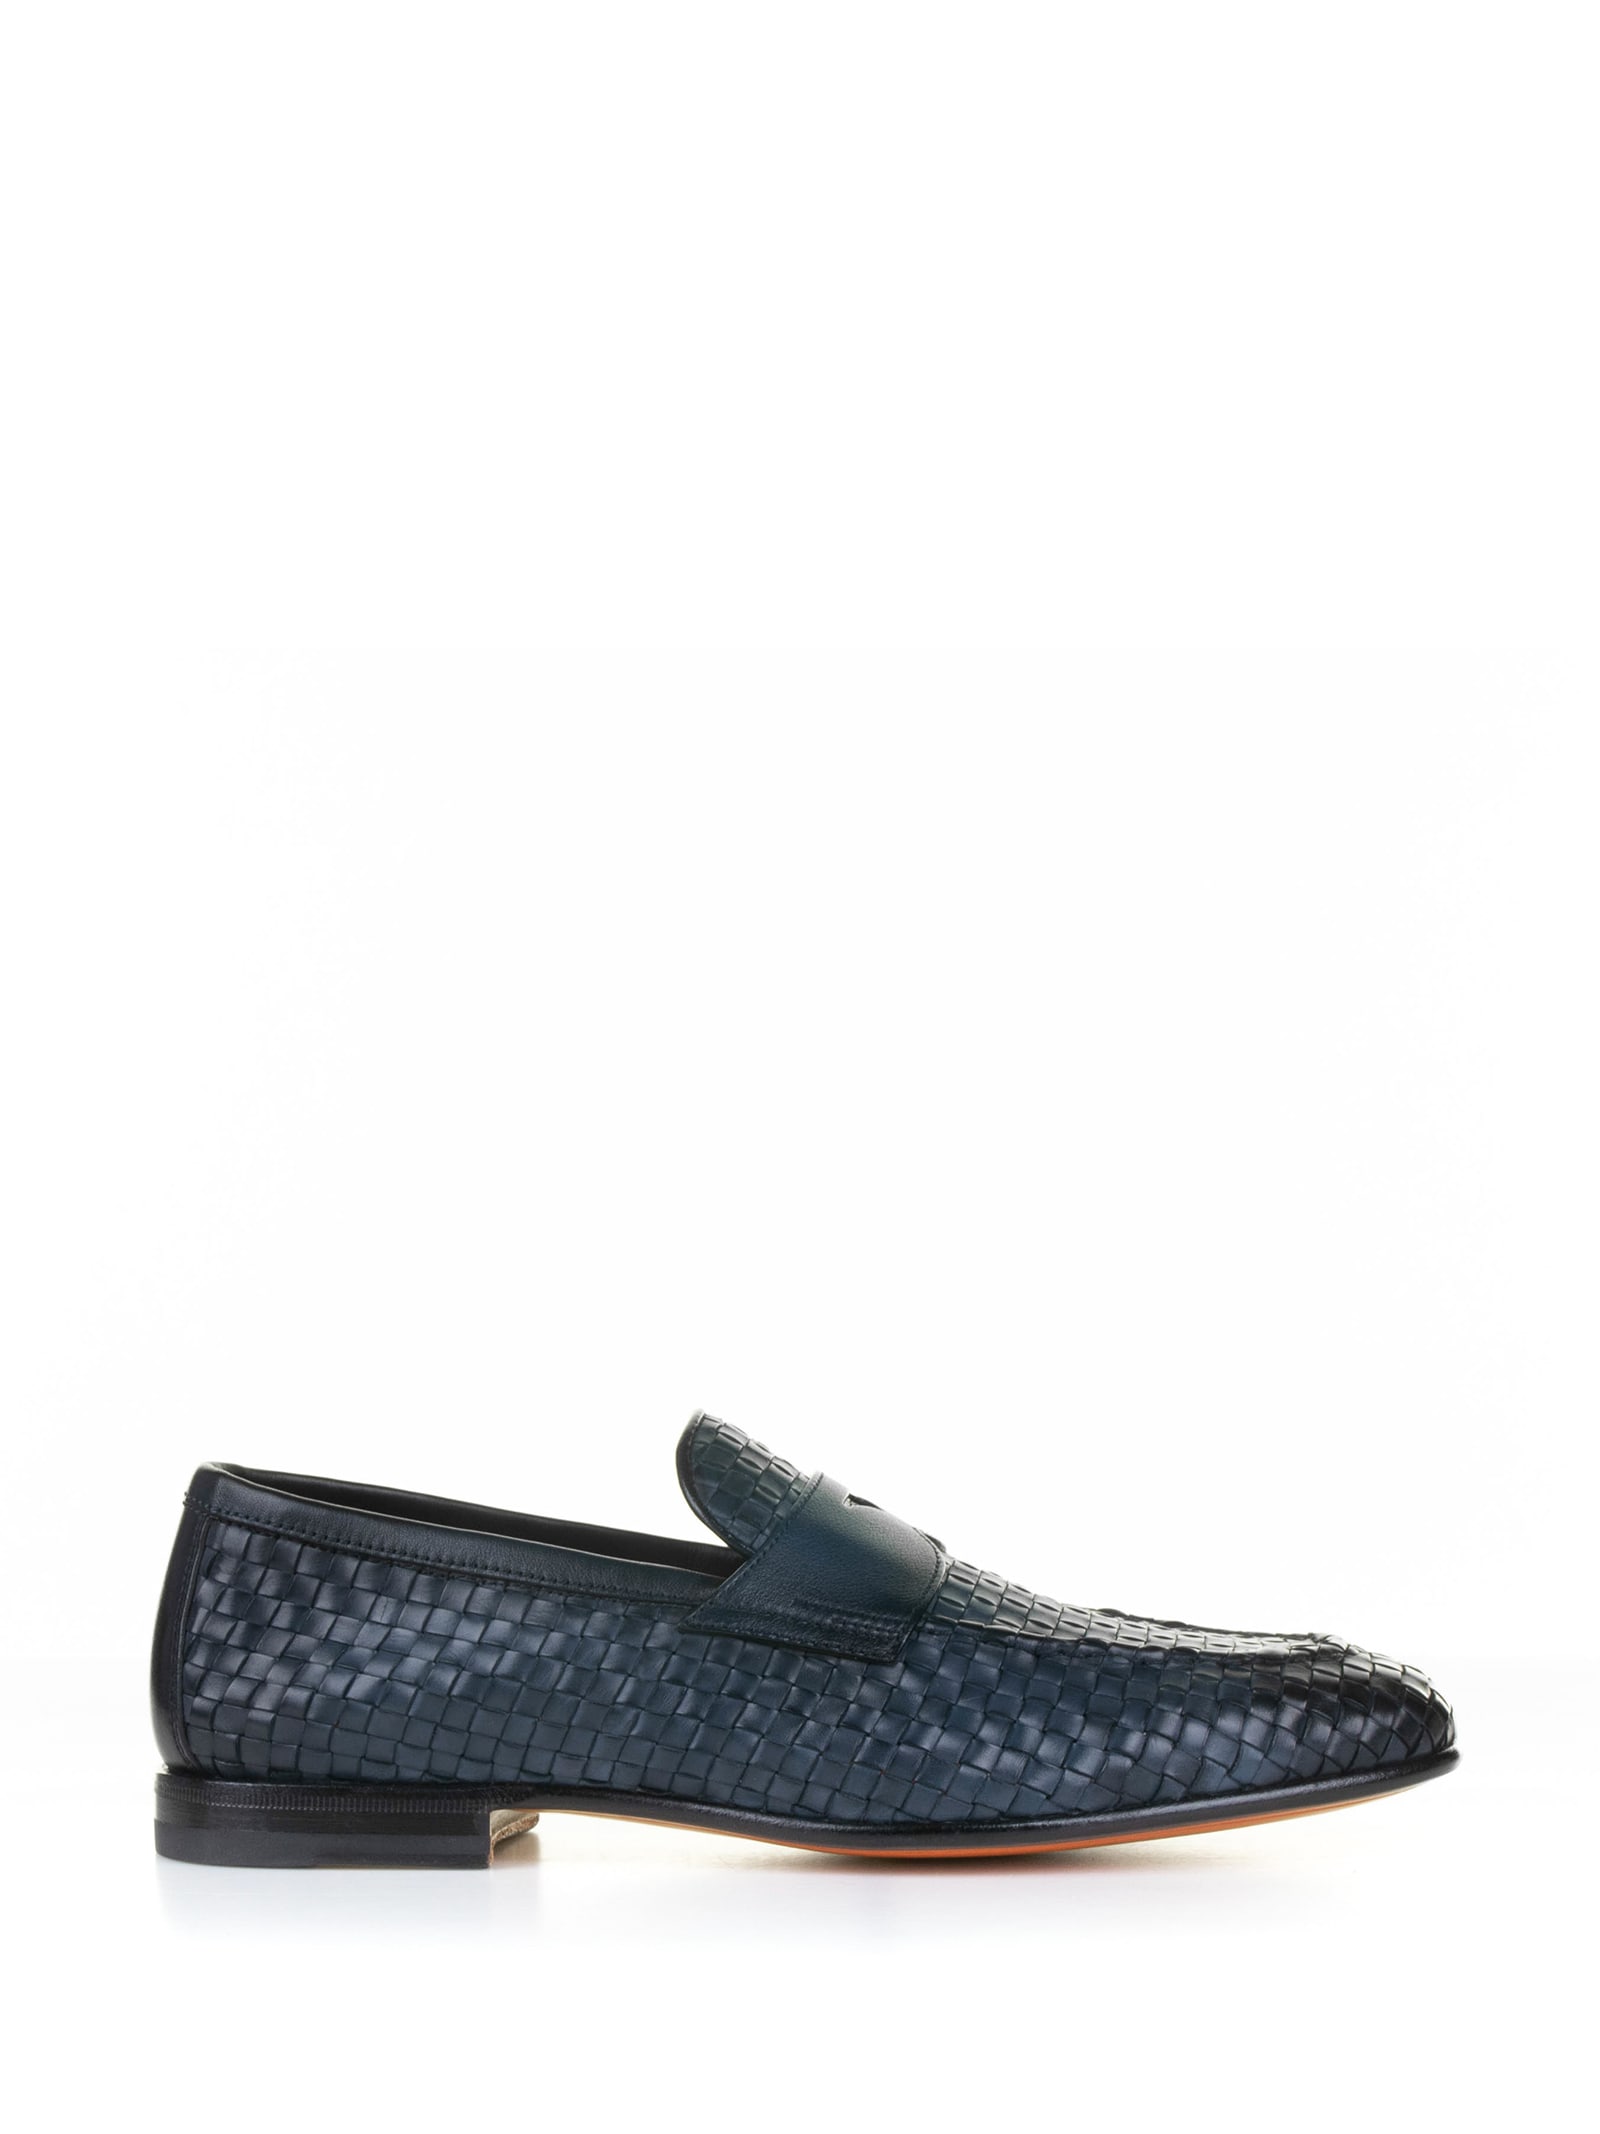 Blue Woven Leather Moccasin